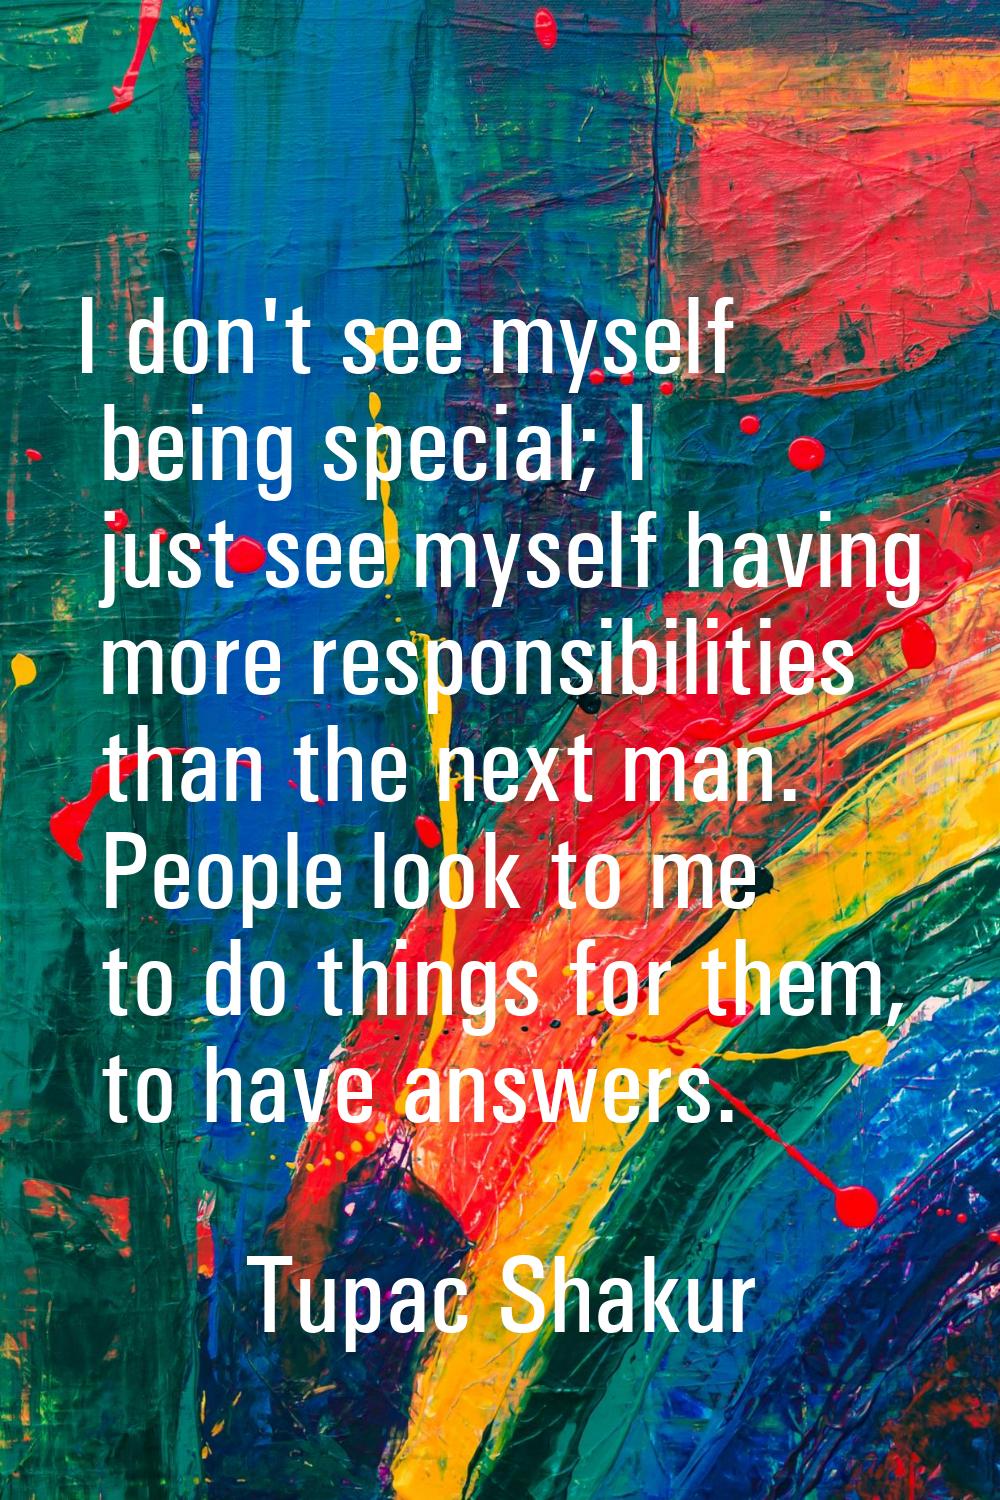 I don't see myself being special; I just see myself having more responsibilities than the next man.